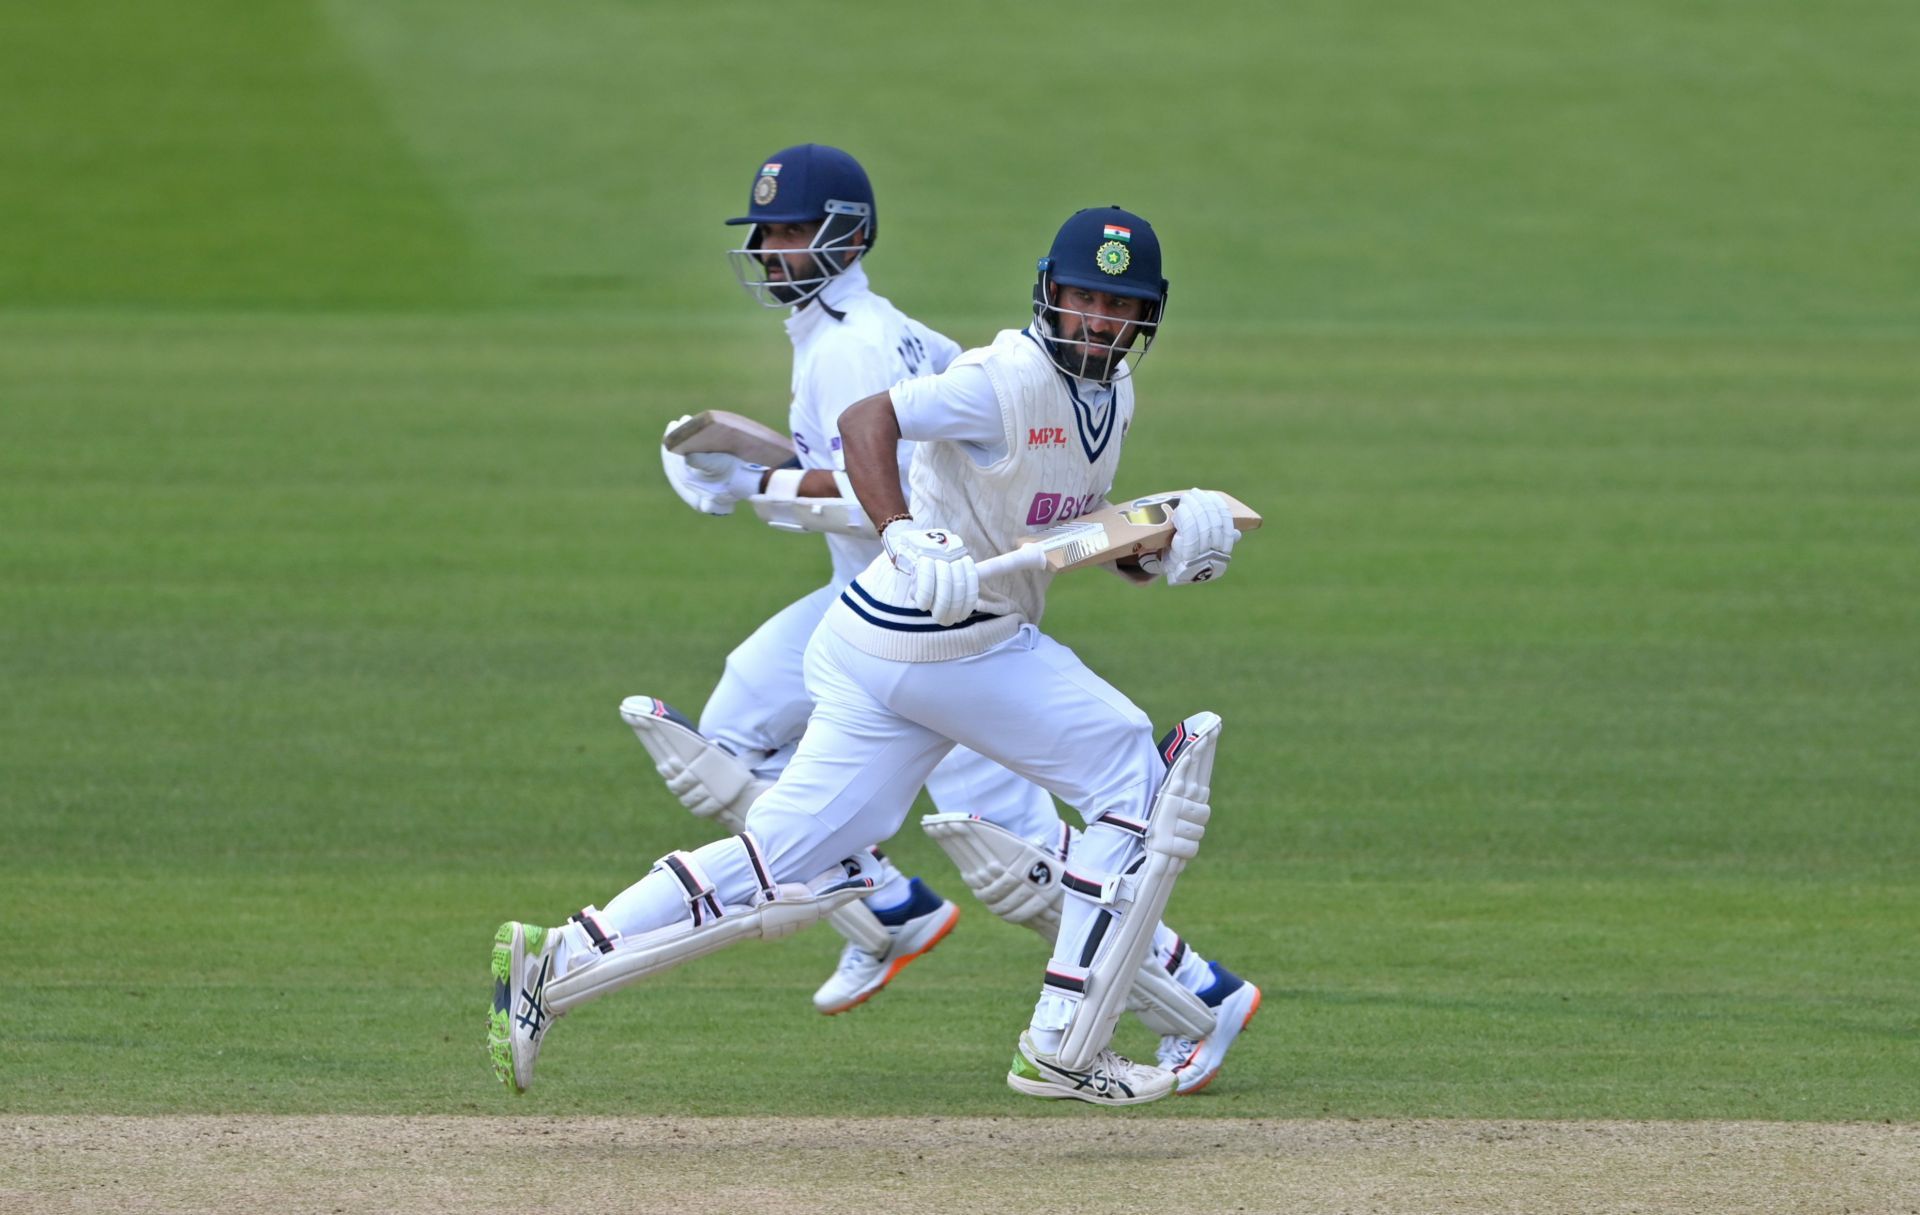 The likes of Ajinkya Rahane and Cheteshwar Pujara have been dropped from the Indian Test side